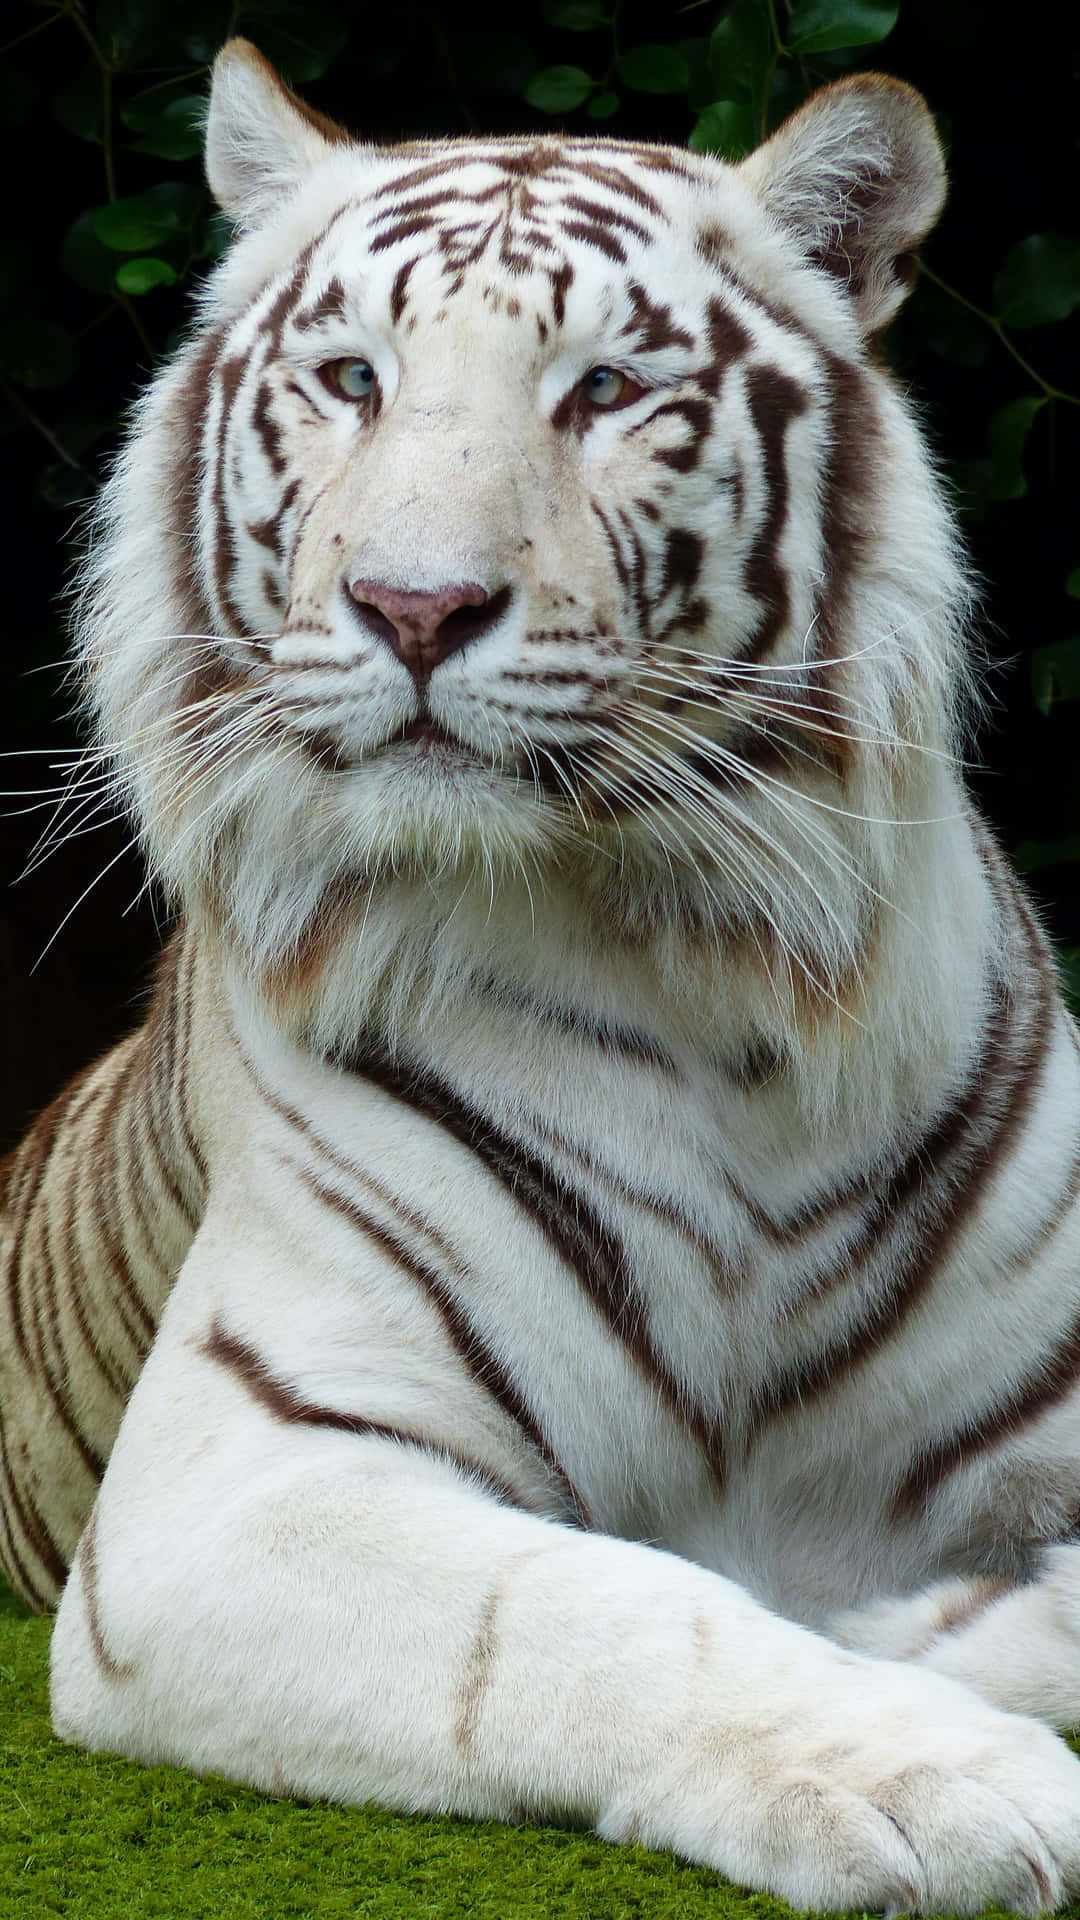 Majestic white tiger in its natural habitat.